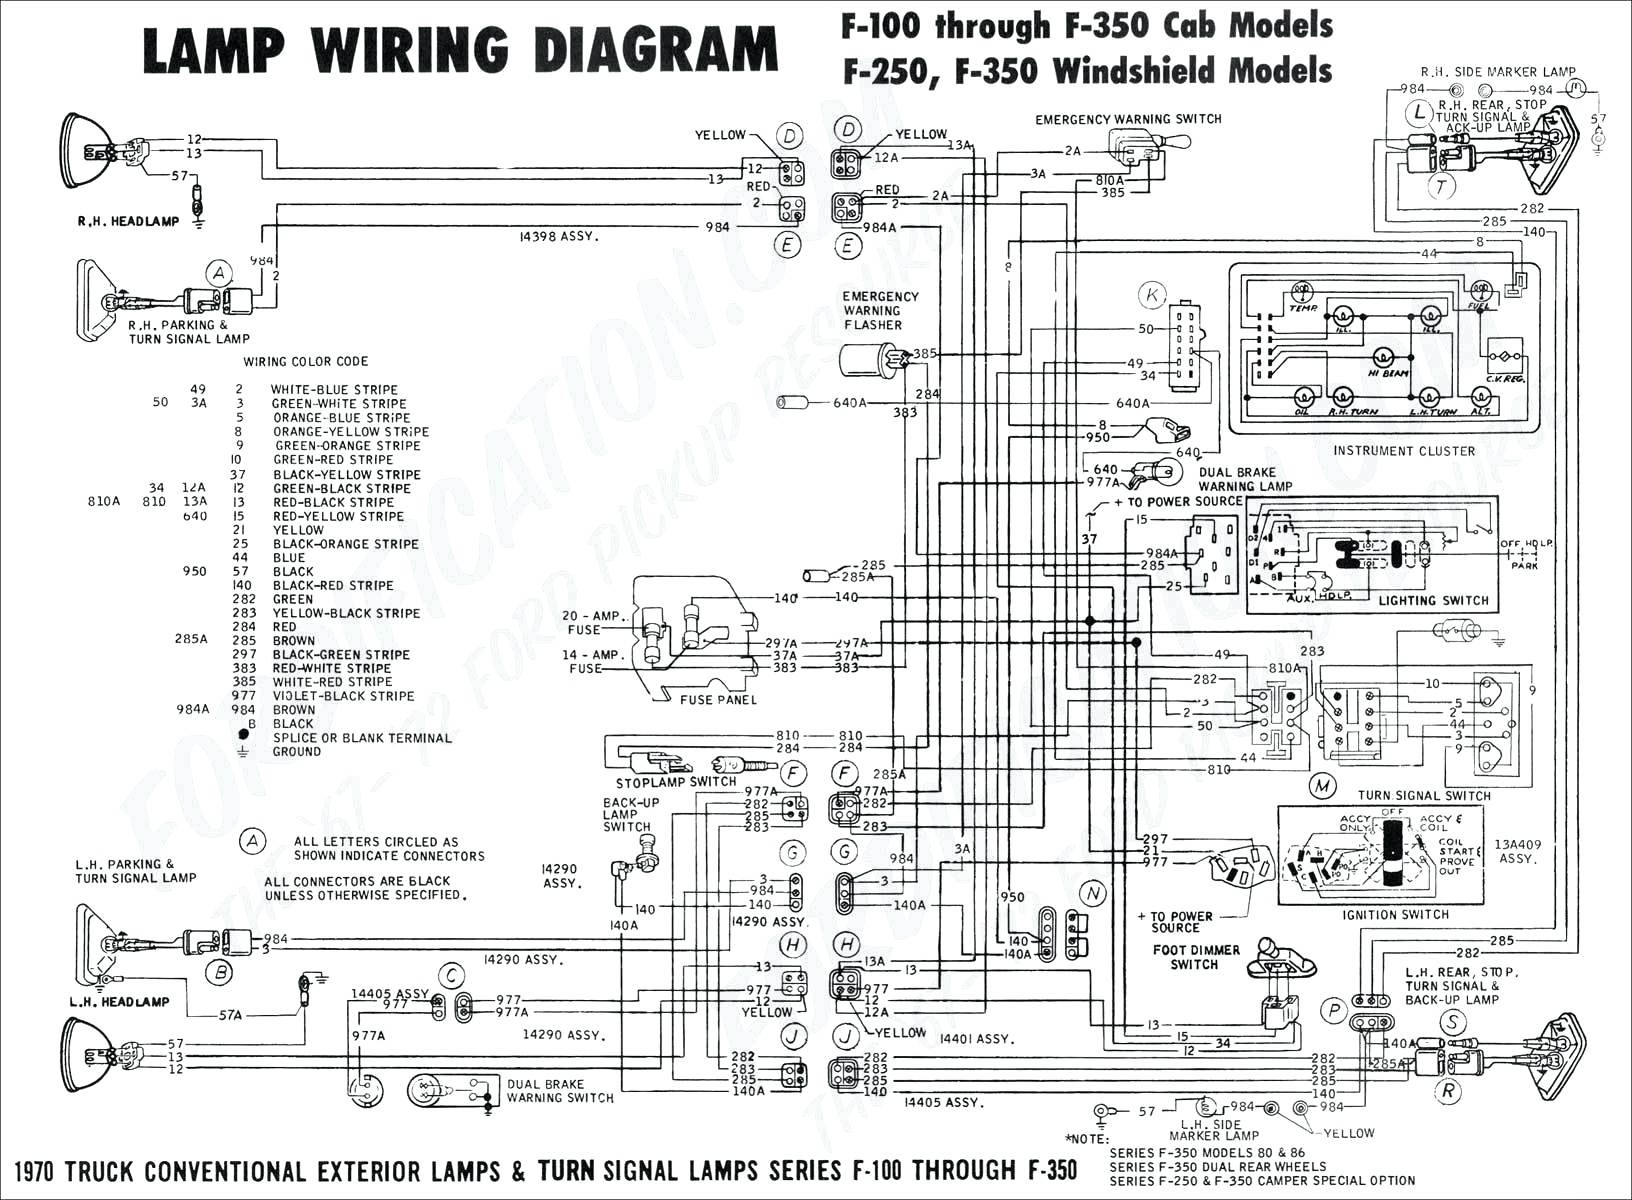 wiring diagram for 1997 ford mustang stereo autos weblog wire center u2022 rh theiquest co 87 Ford F 250 Wiring Harness Diagram Ford F 250 Lighting